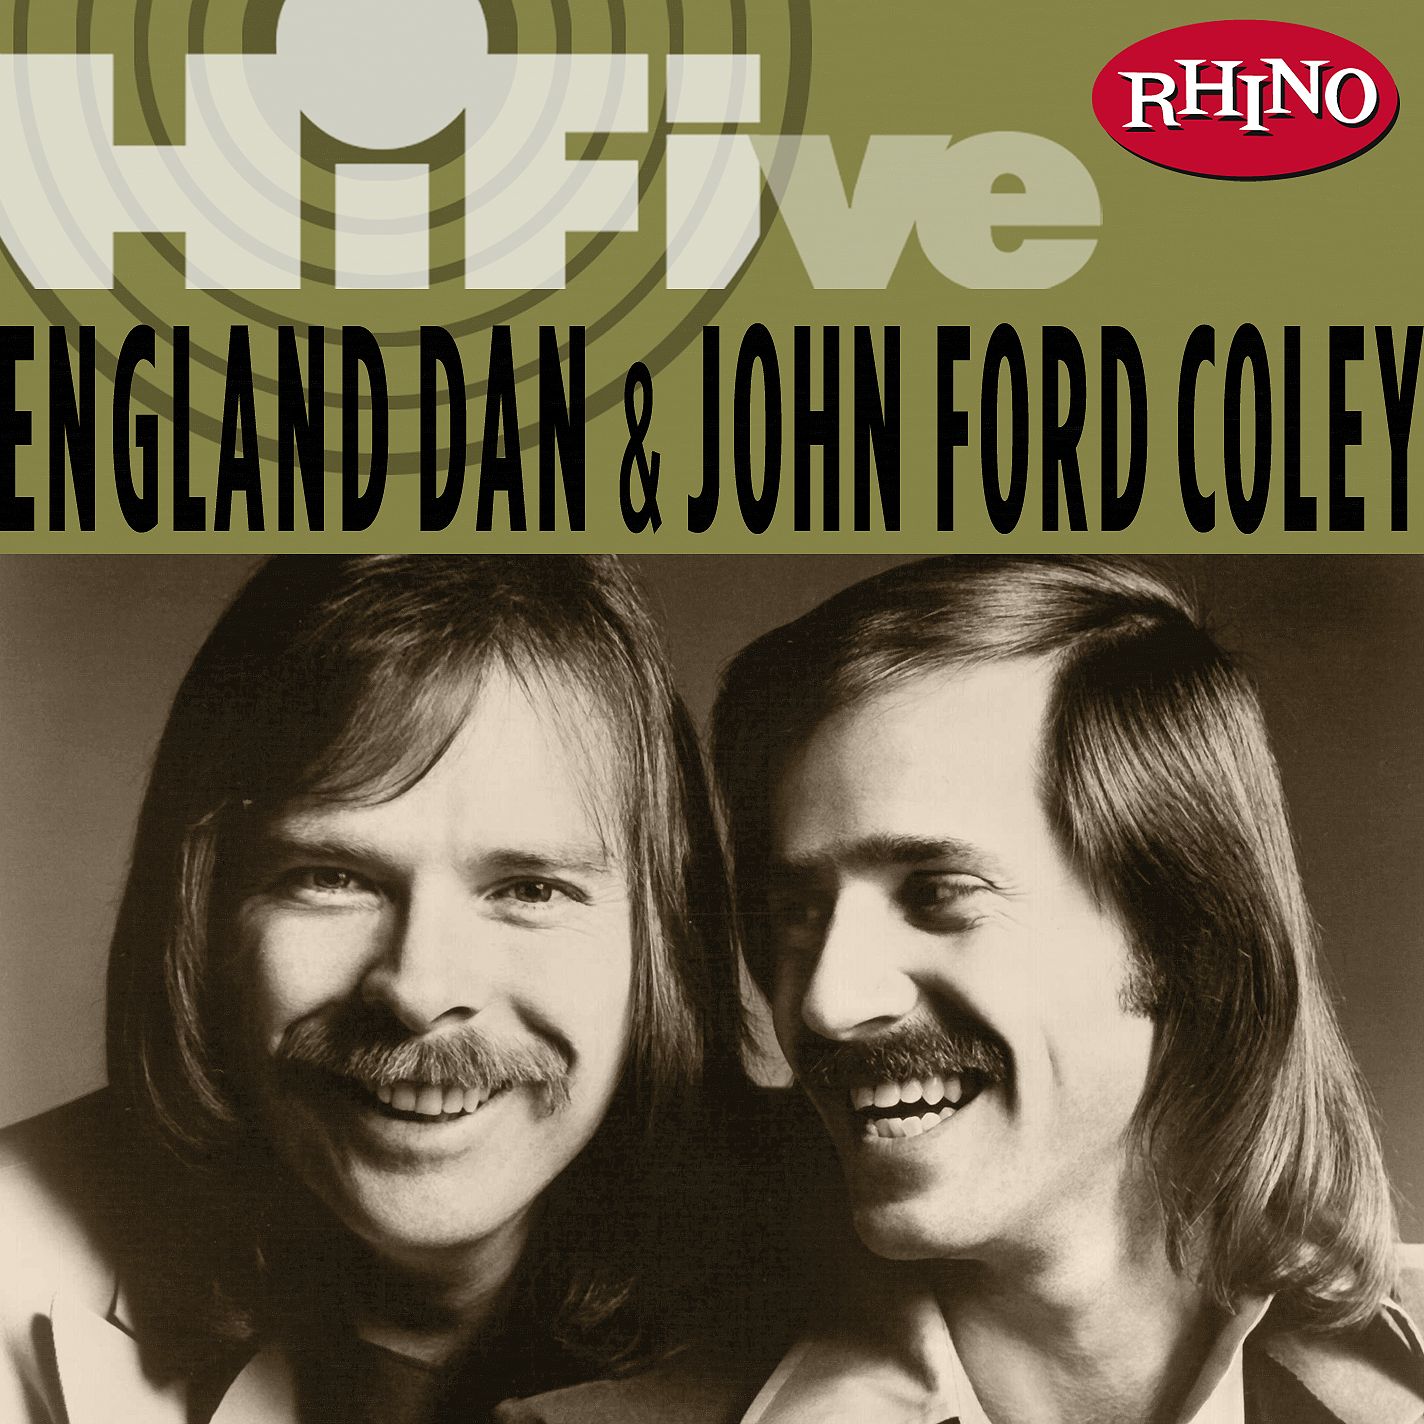 England dan and john ford coley greatest hits download #1